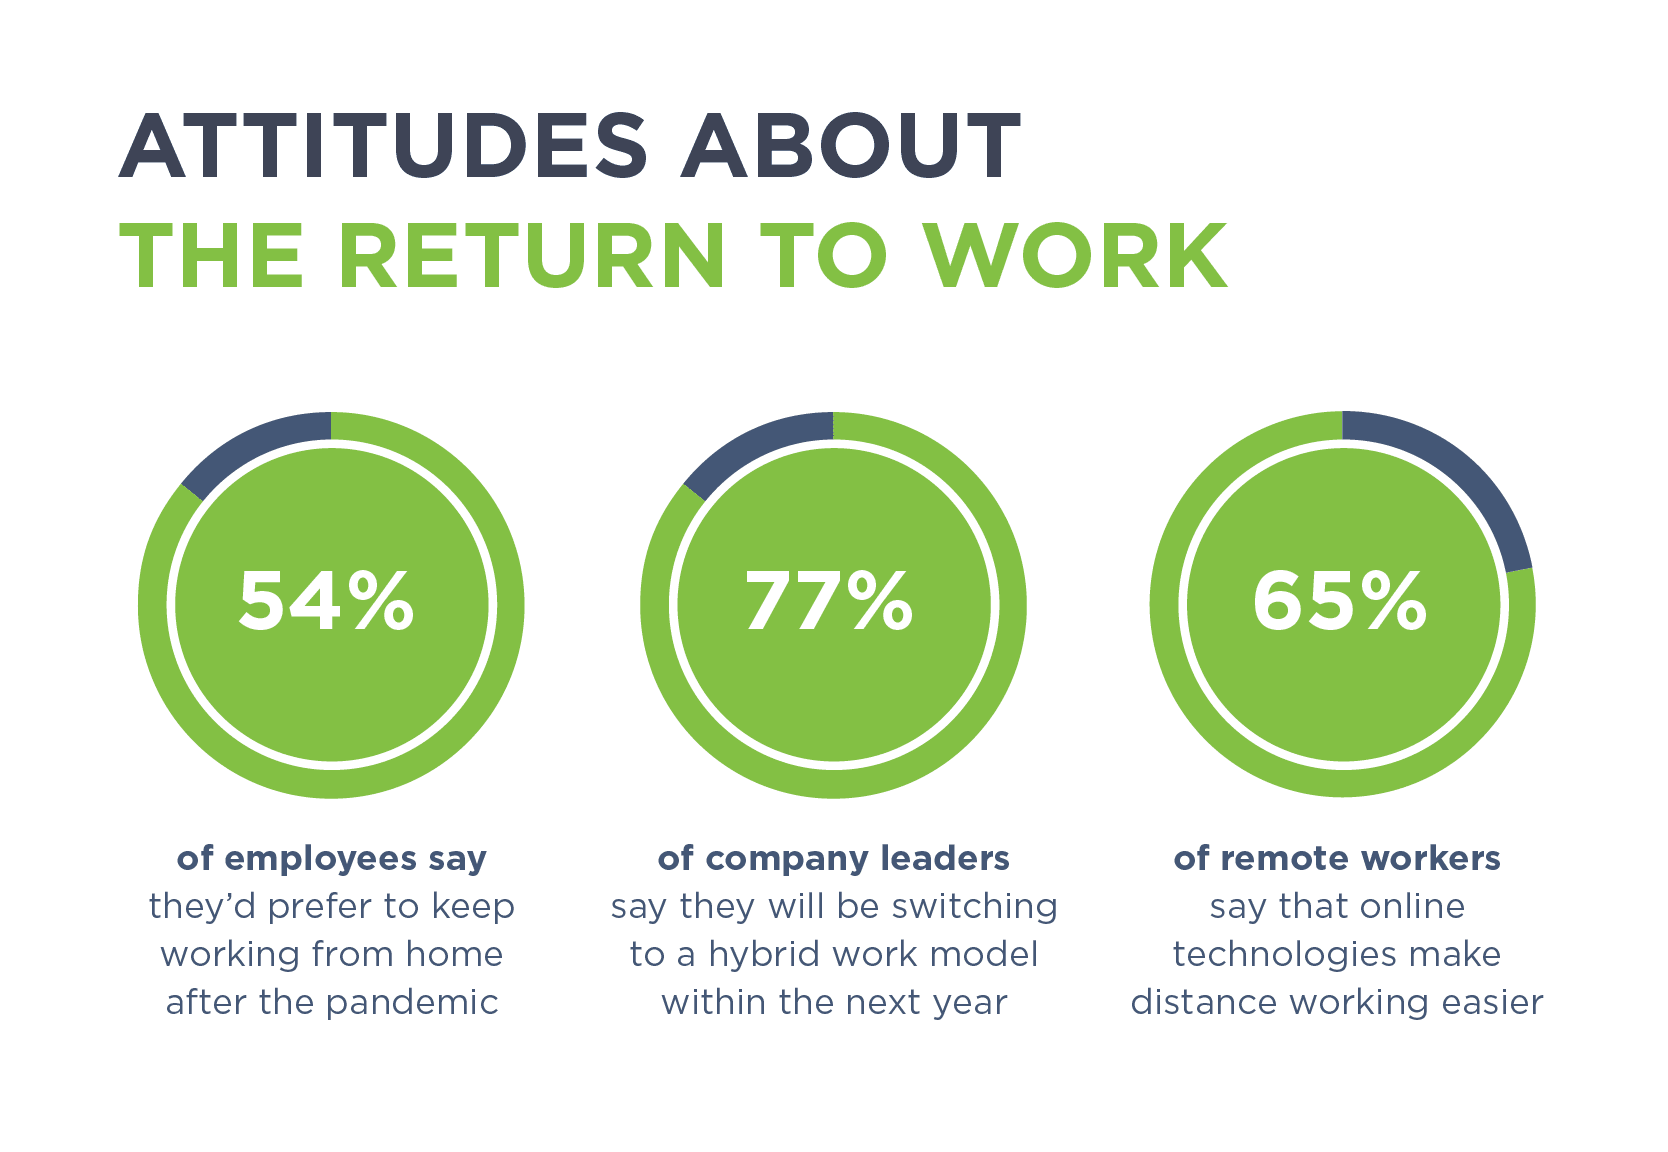 Survey reveals employee attitudes about returning to work post-pandemic.